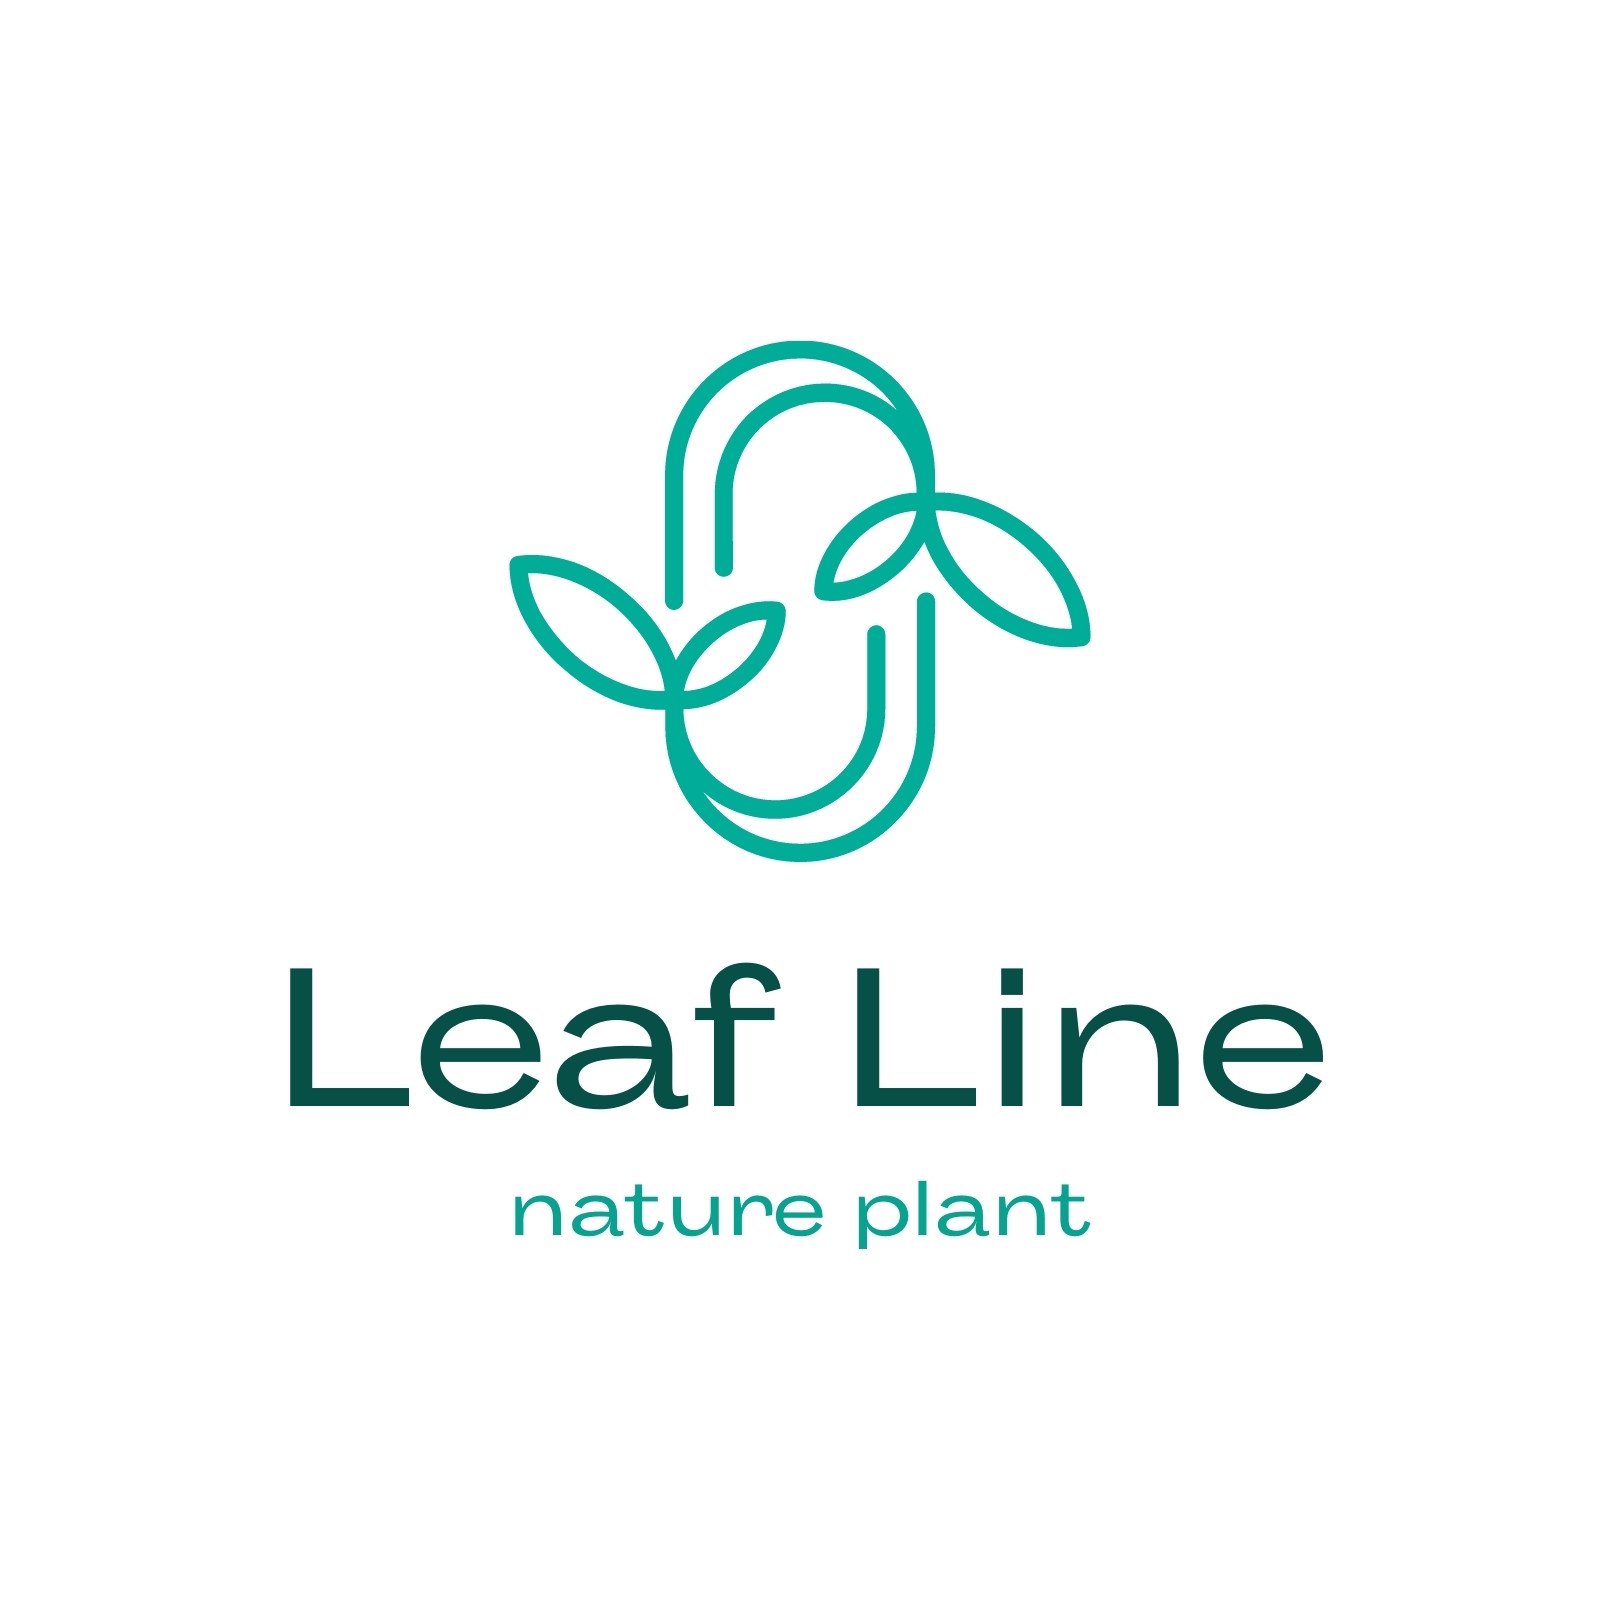 Plant Logo Projects :: Photos, videos, logos, illustrations and branding ::  Behance